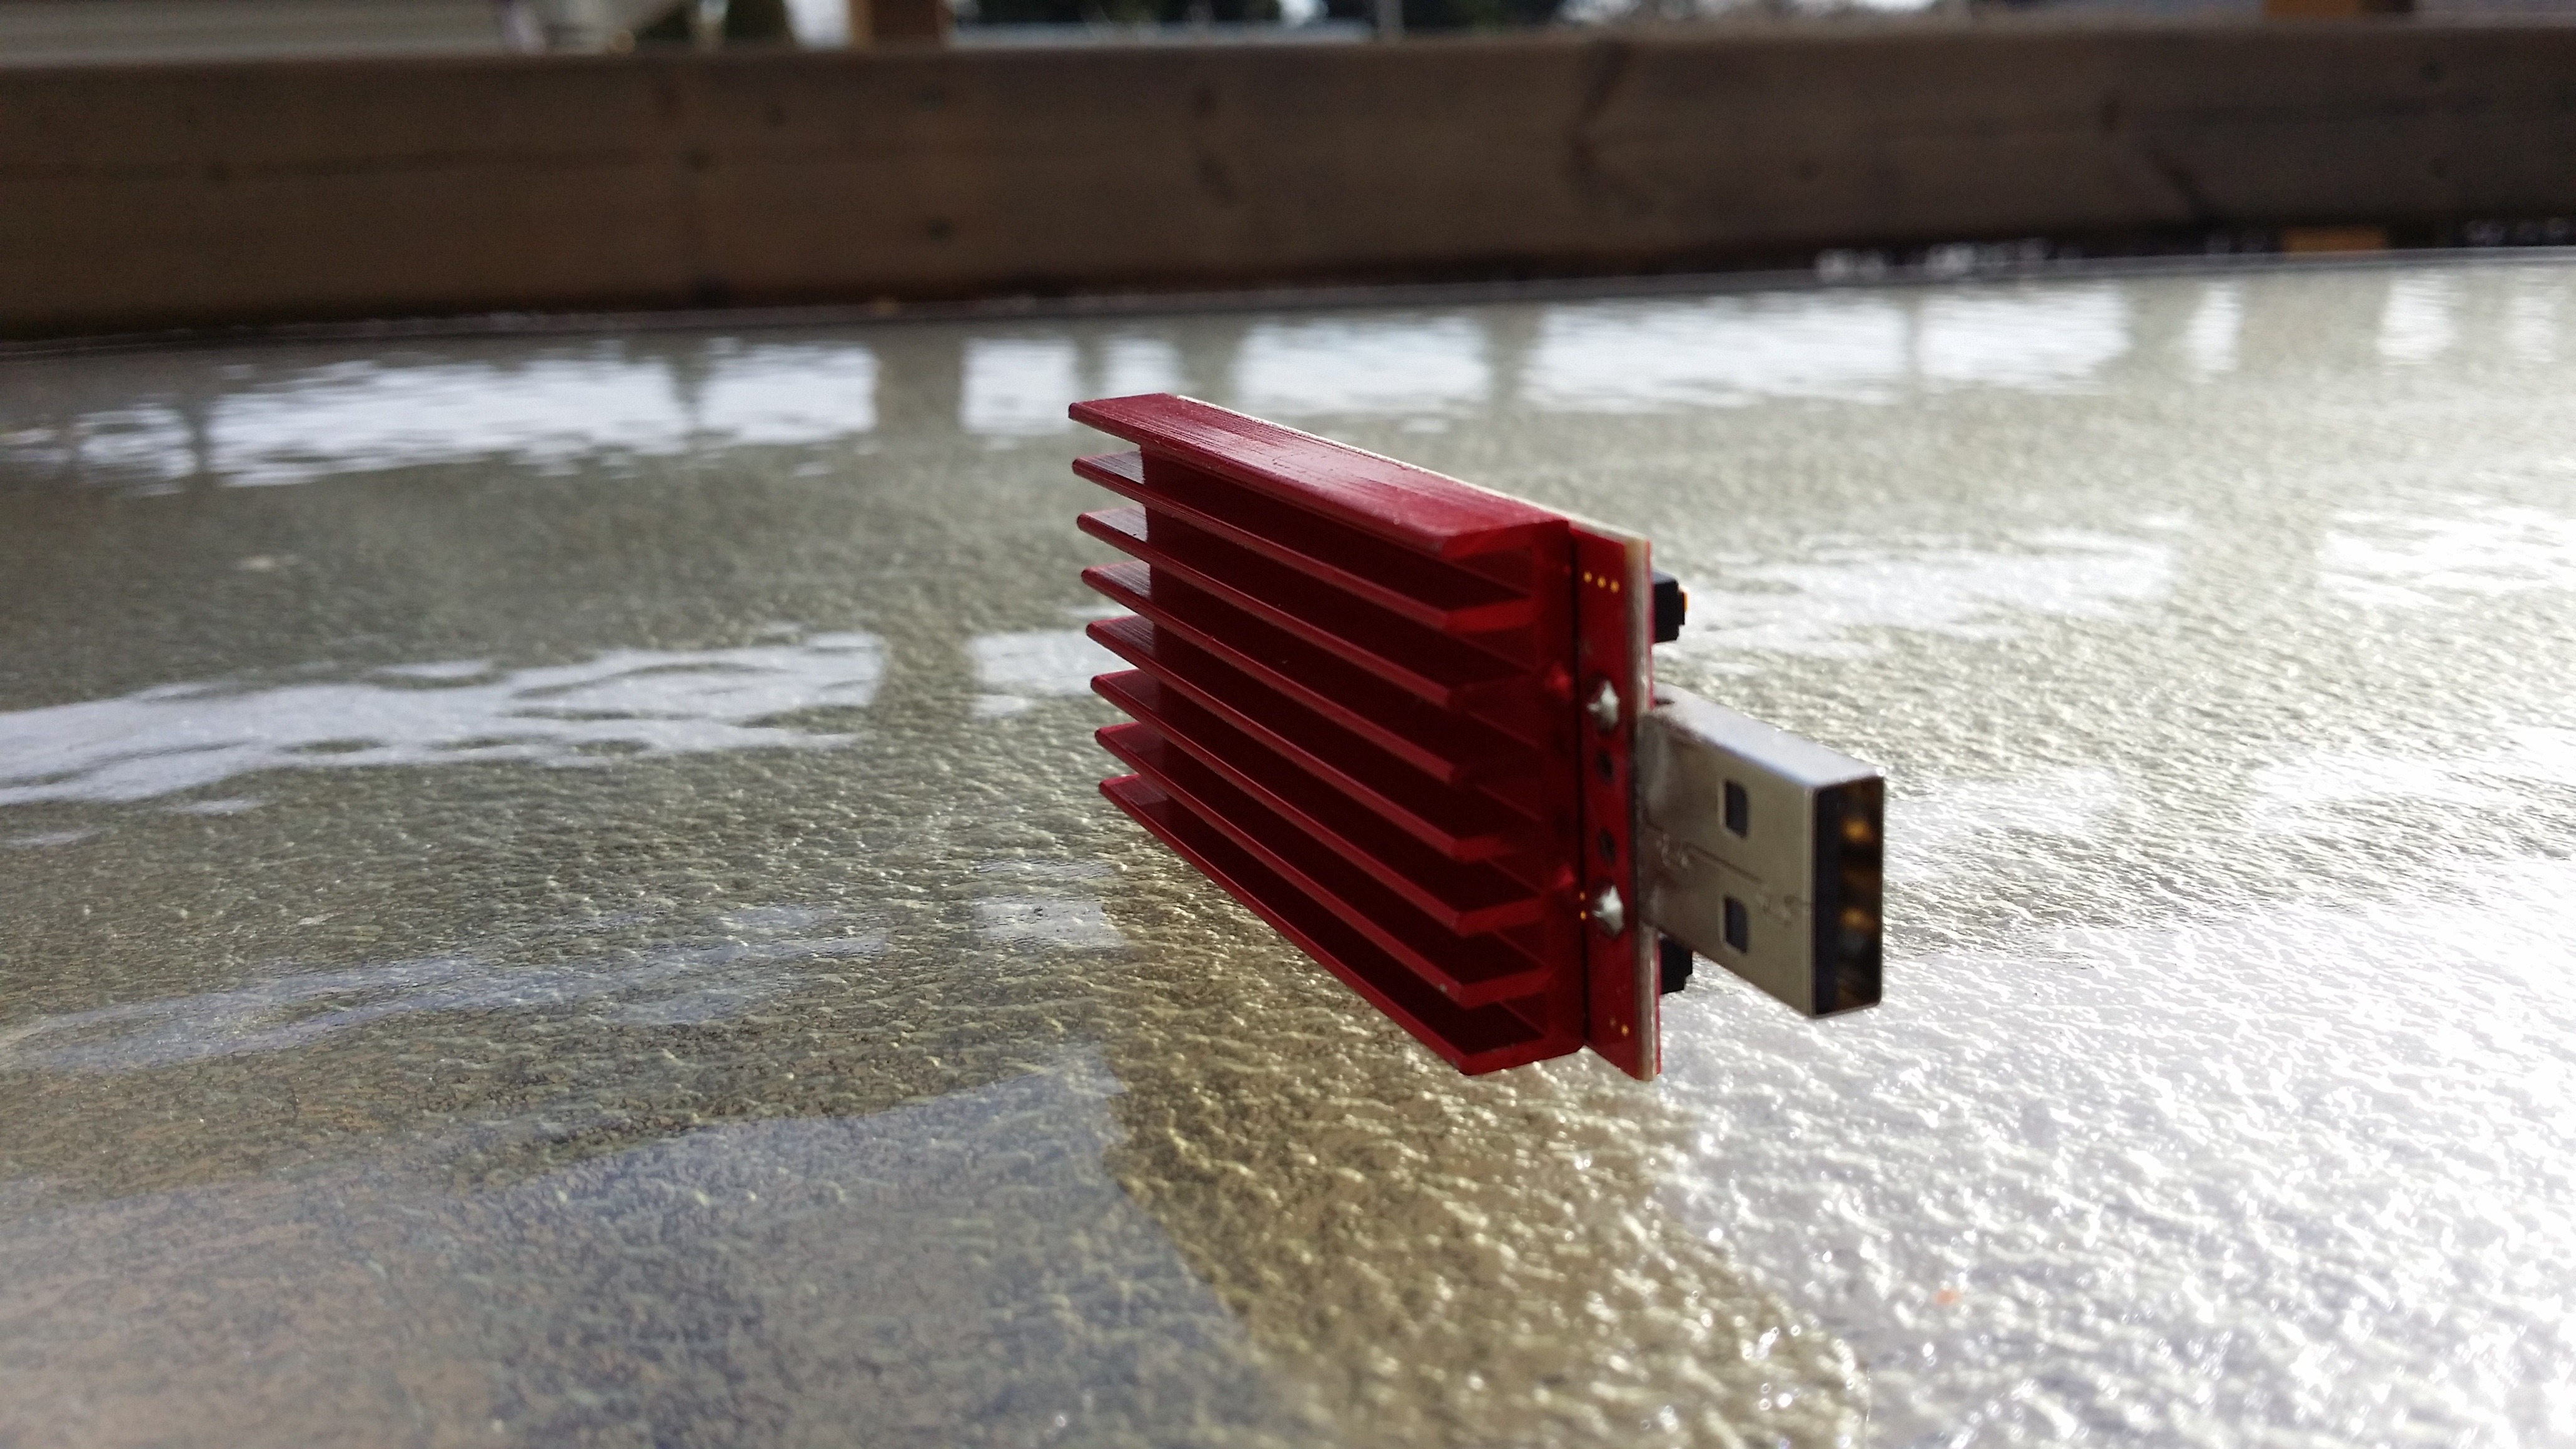 Bitcoin Mining on the Cheap? USB Block Erupter ASIC Miner Review 